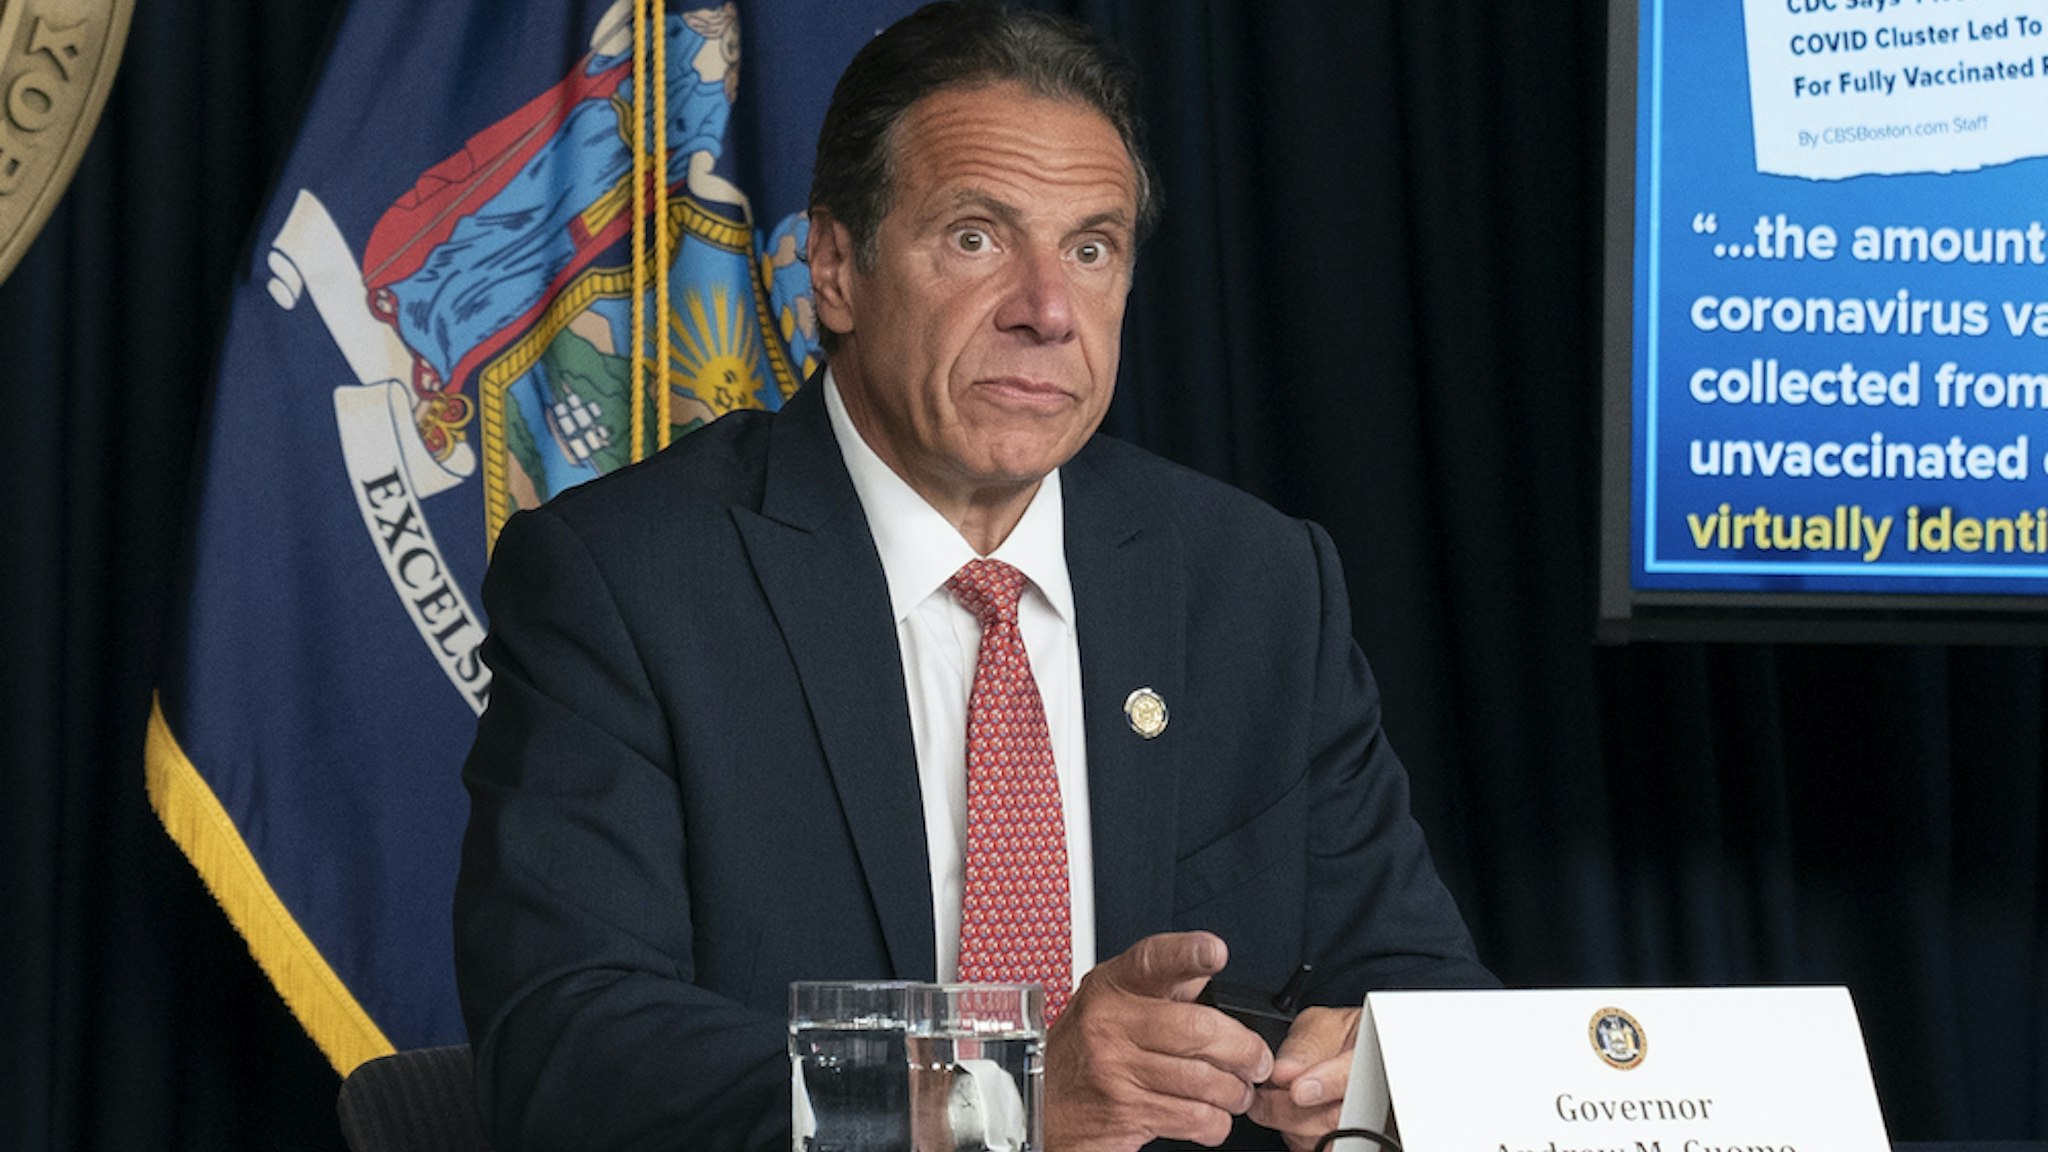 Governor Andrew Cuomo holds press briefing and makes announcement to combat COVID-19 Delta variant at 633 3rd Avenue. (Photo by Lev Radin/Pacific Press/LightRocket via Getty Images)